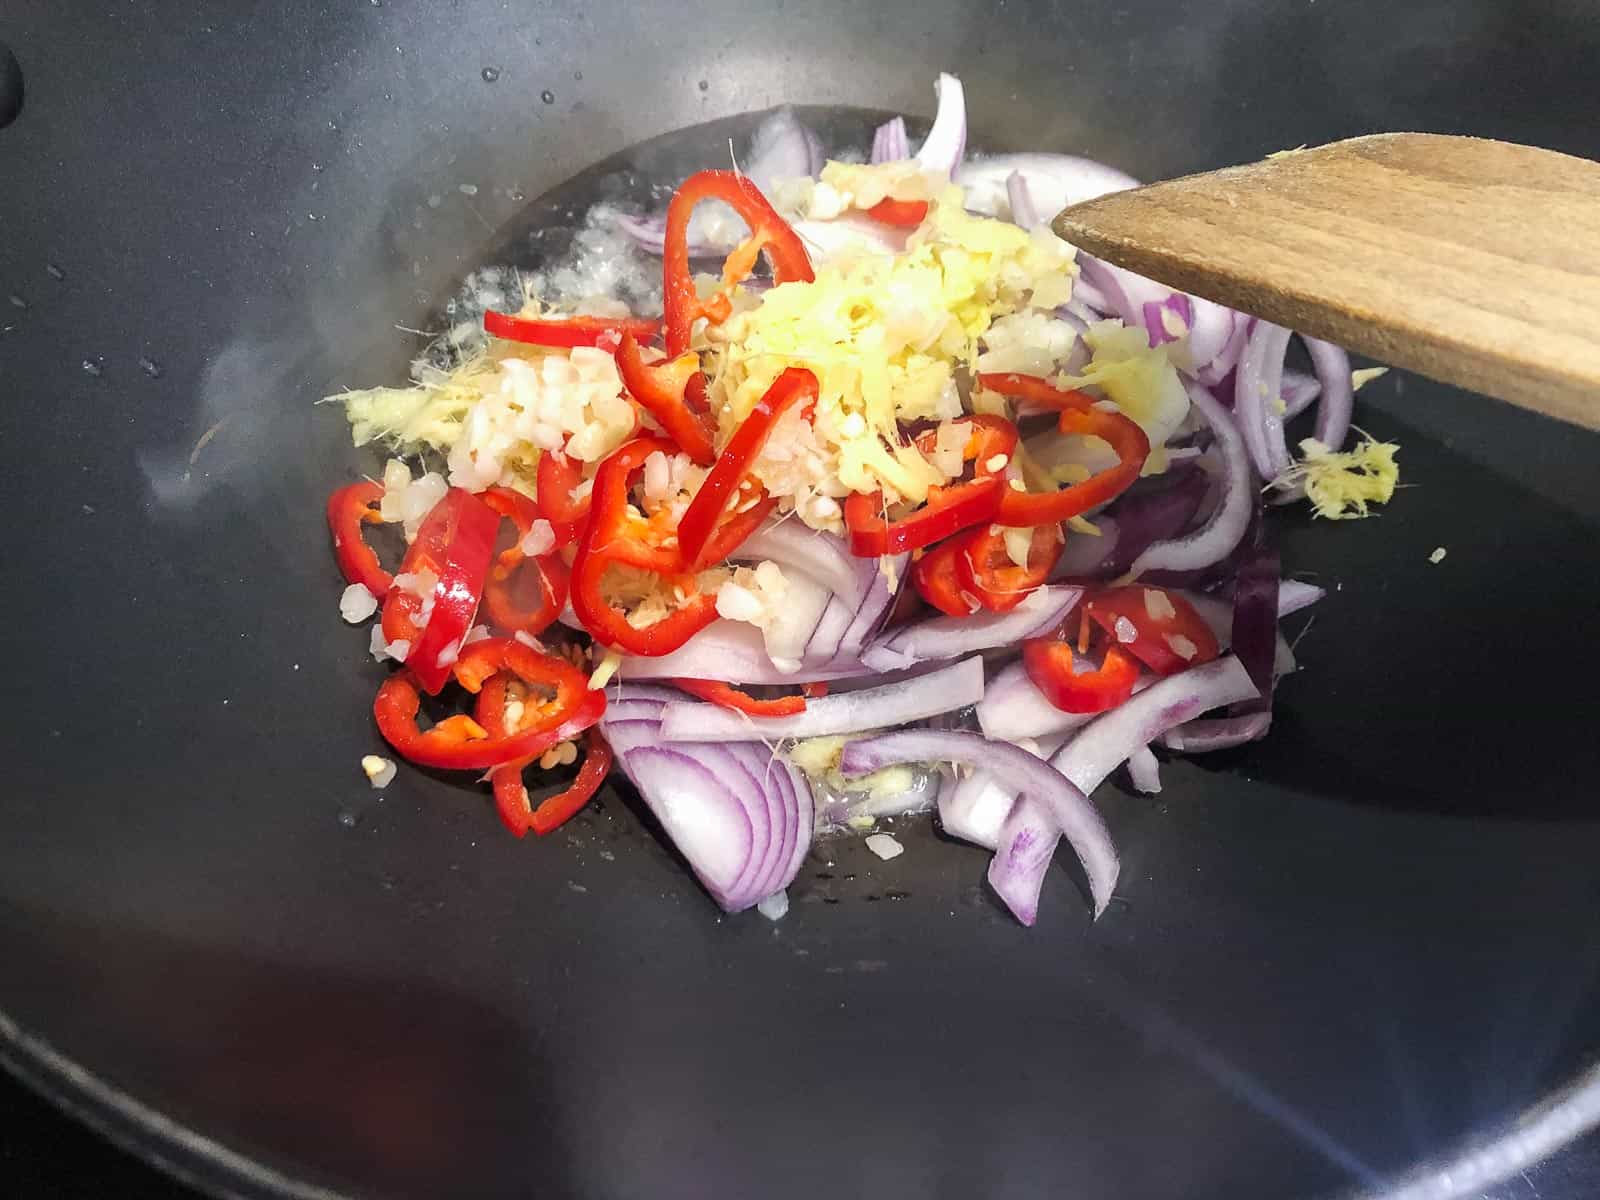 red onions, garlic, red chilies and grated ginger being fried in a wok.